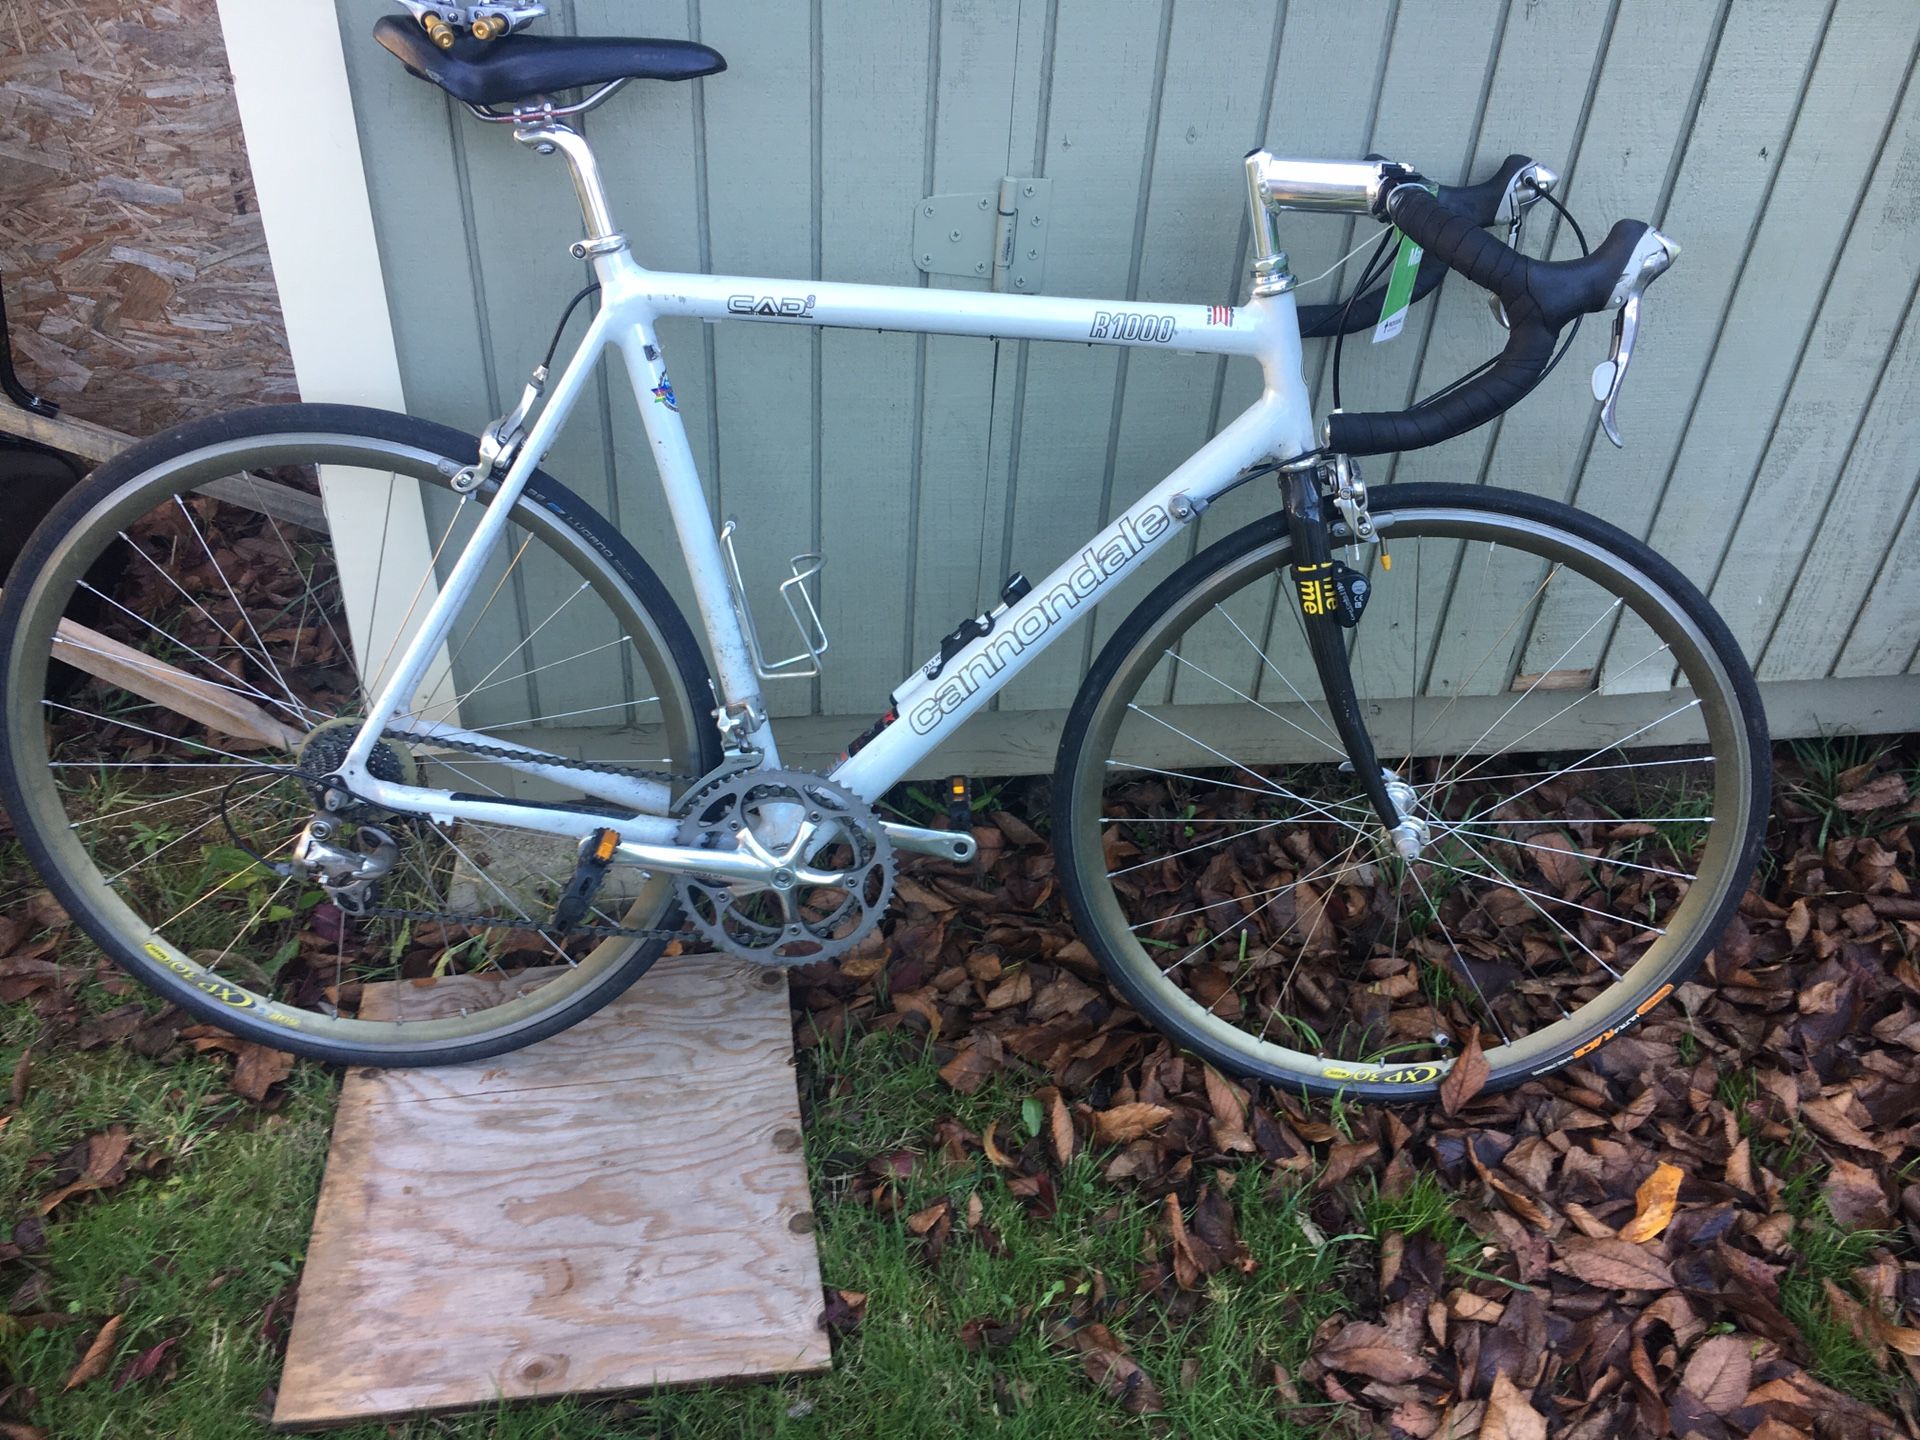 Cannondale CAD3 R1000 for sale!!!